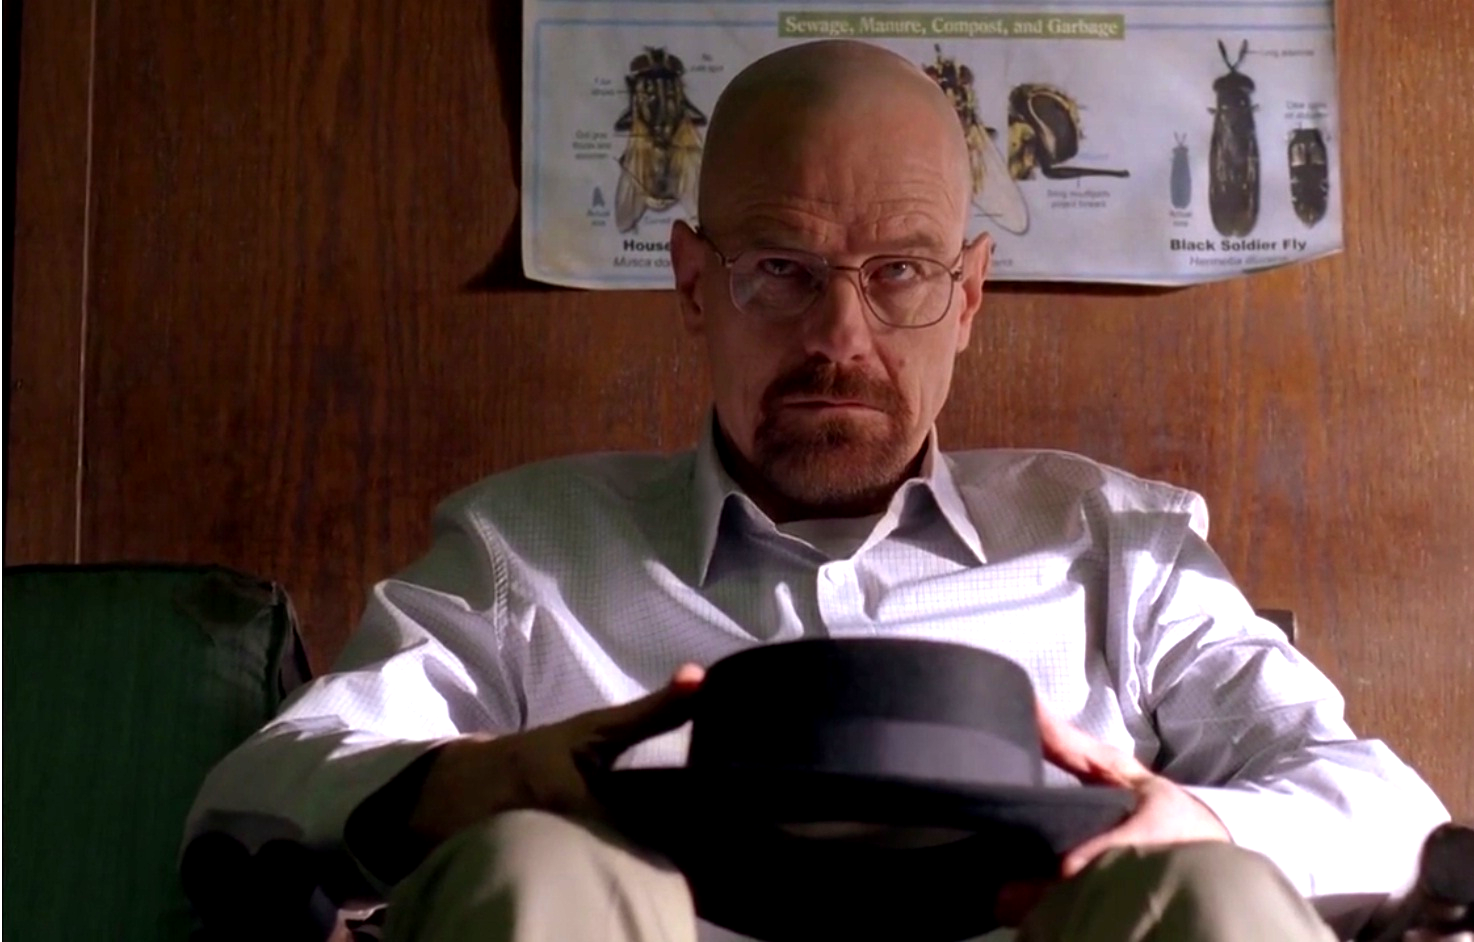 Breaking Bad, like its chemistry, was a study of change